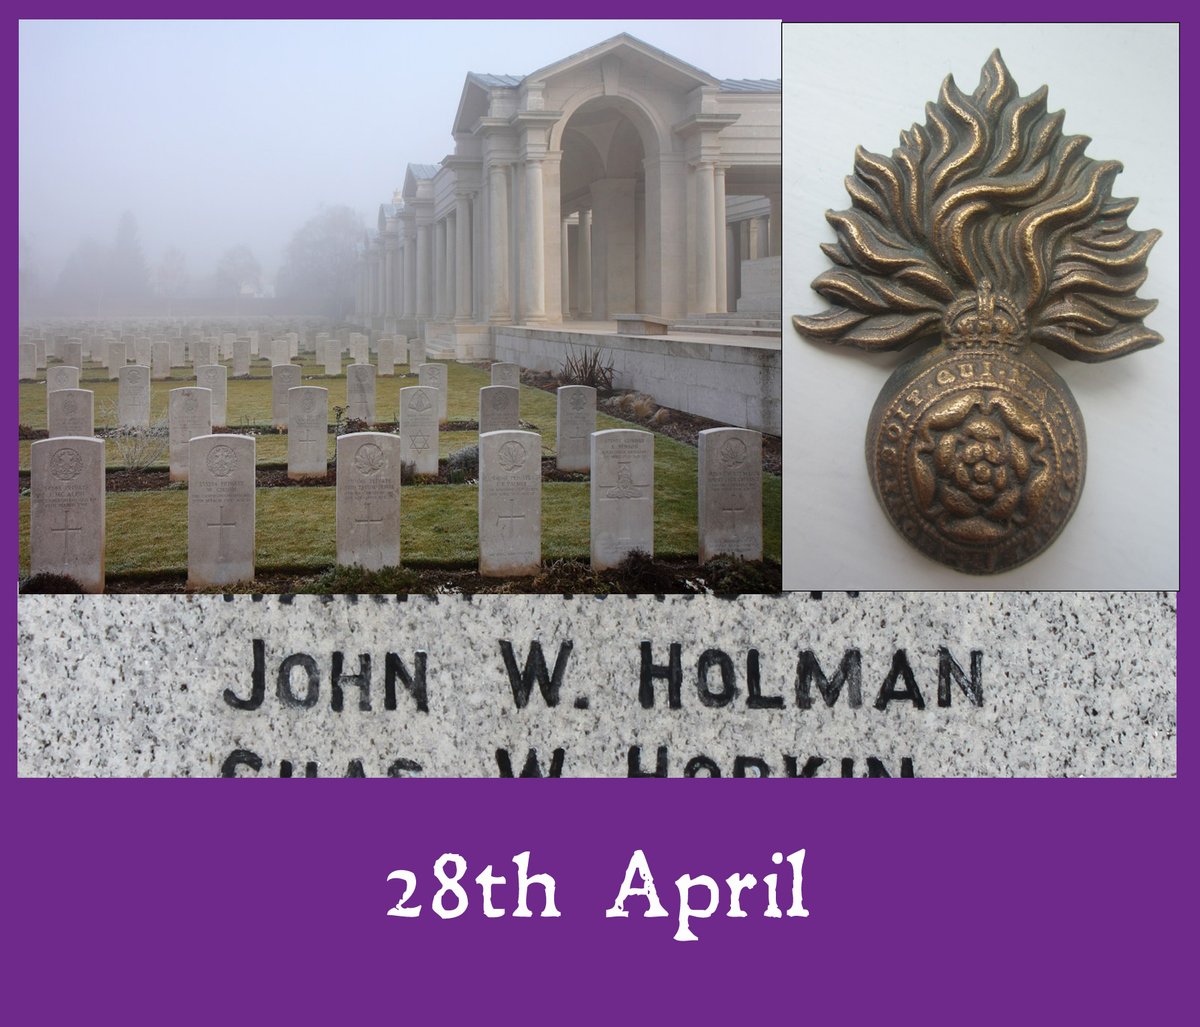 Remembering Pte John Holman, 17th (Empire) Royal Fusiliers. Killed in action on this day in 1917, age 40. Formerly 3176 Royal Fusiliers. Son of Mr & Mrs John Holman, 34 Lynn Rd, Wisbech. Husband of Mabel May Holman. Arras Memorial, Pas de Calais, France. #WisbechWarMemorial